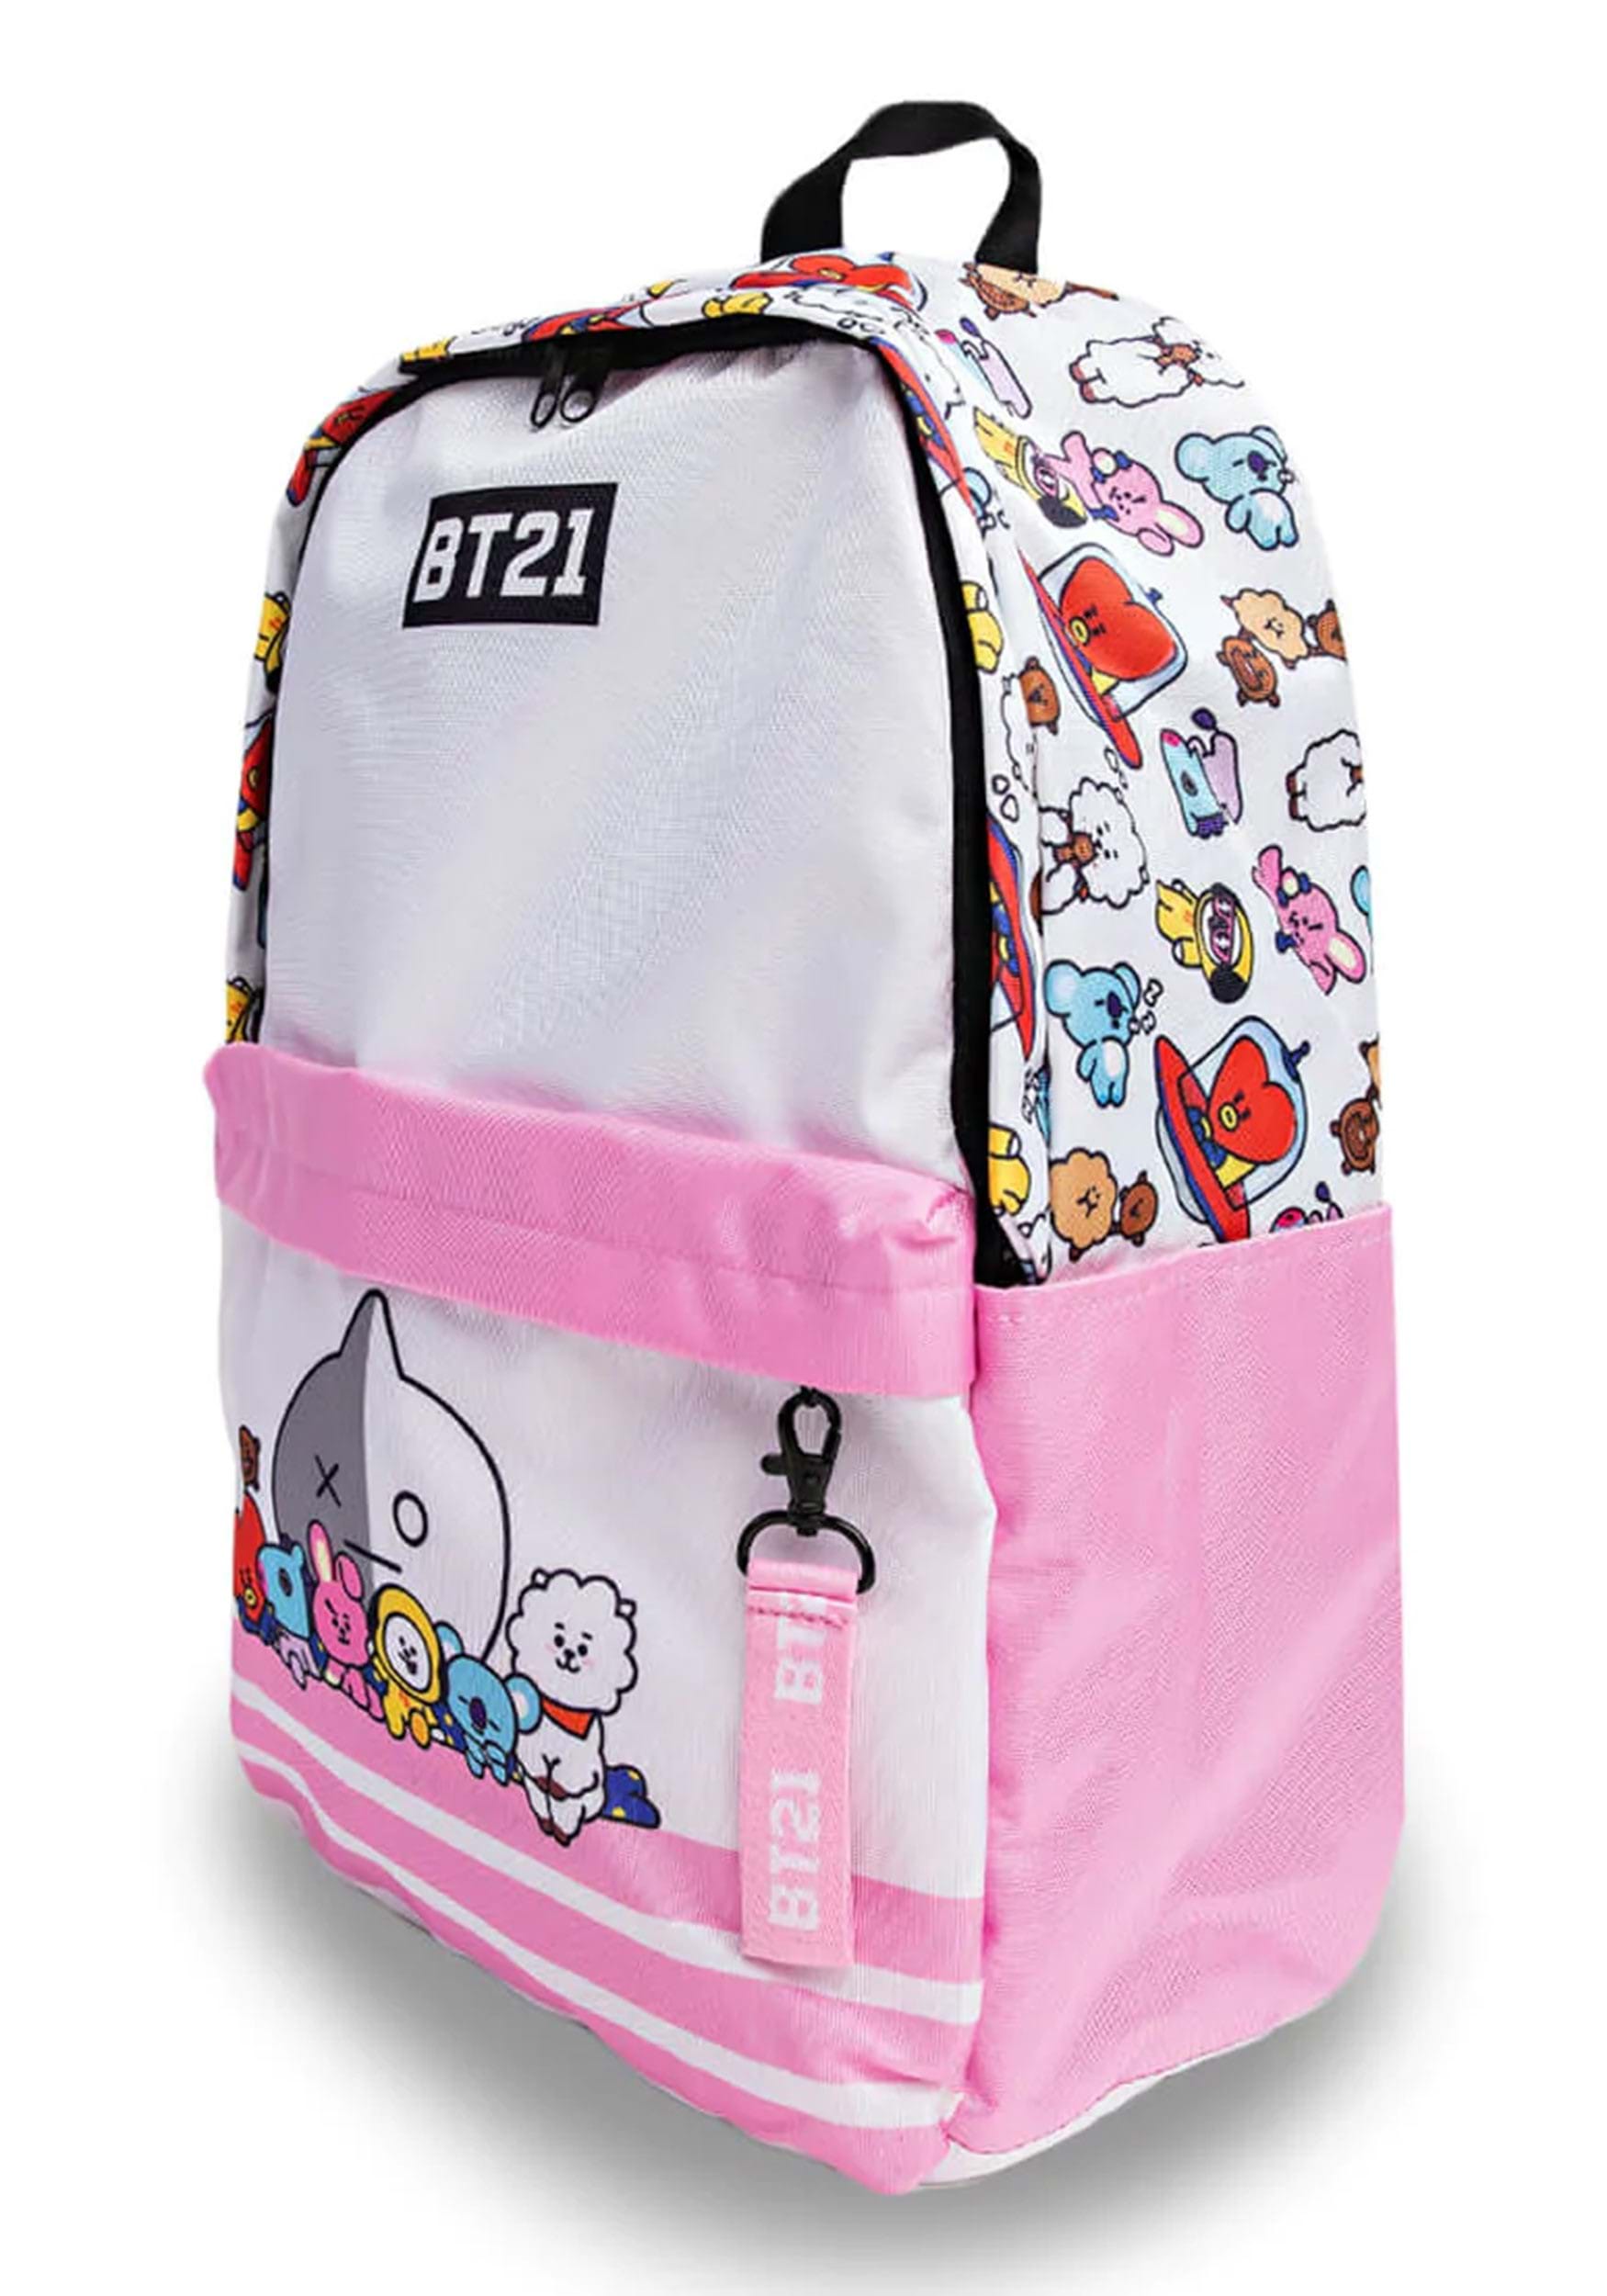 BT21 Jelly Candy Treats Mini Backpack | Hot Topic